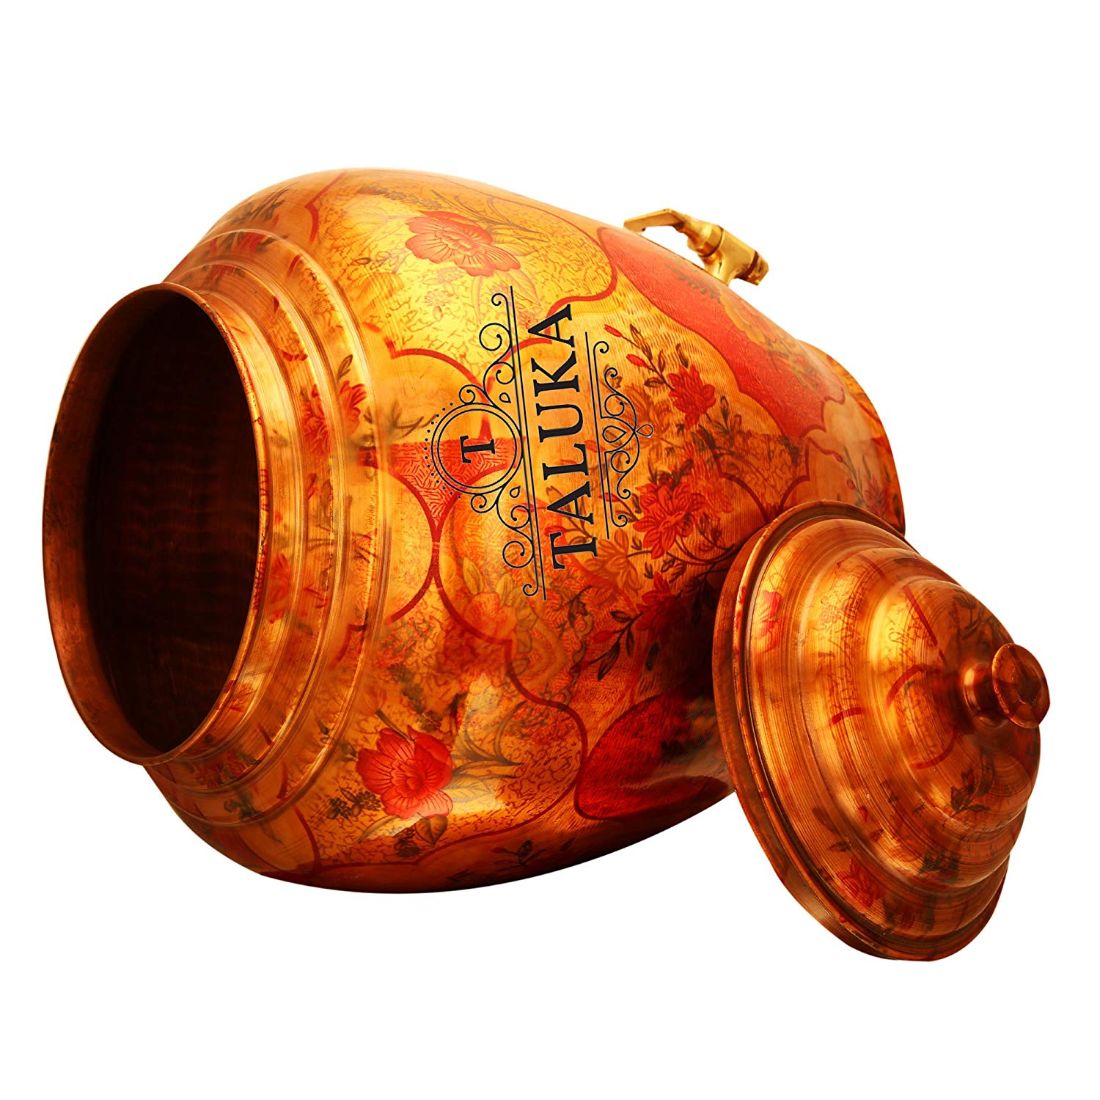 Copper Belly Design Water Pot Dispenser 16 Liter With 1 PC Copper Bottle 800 ML for use Storage Drinking Water